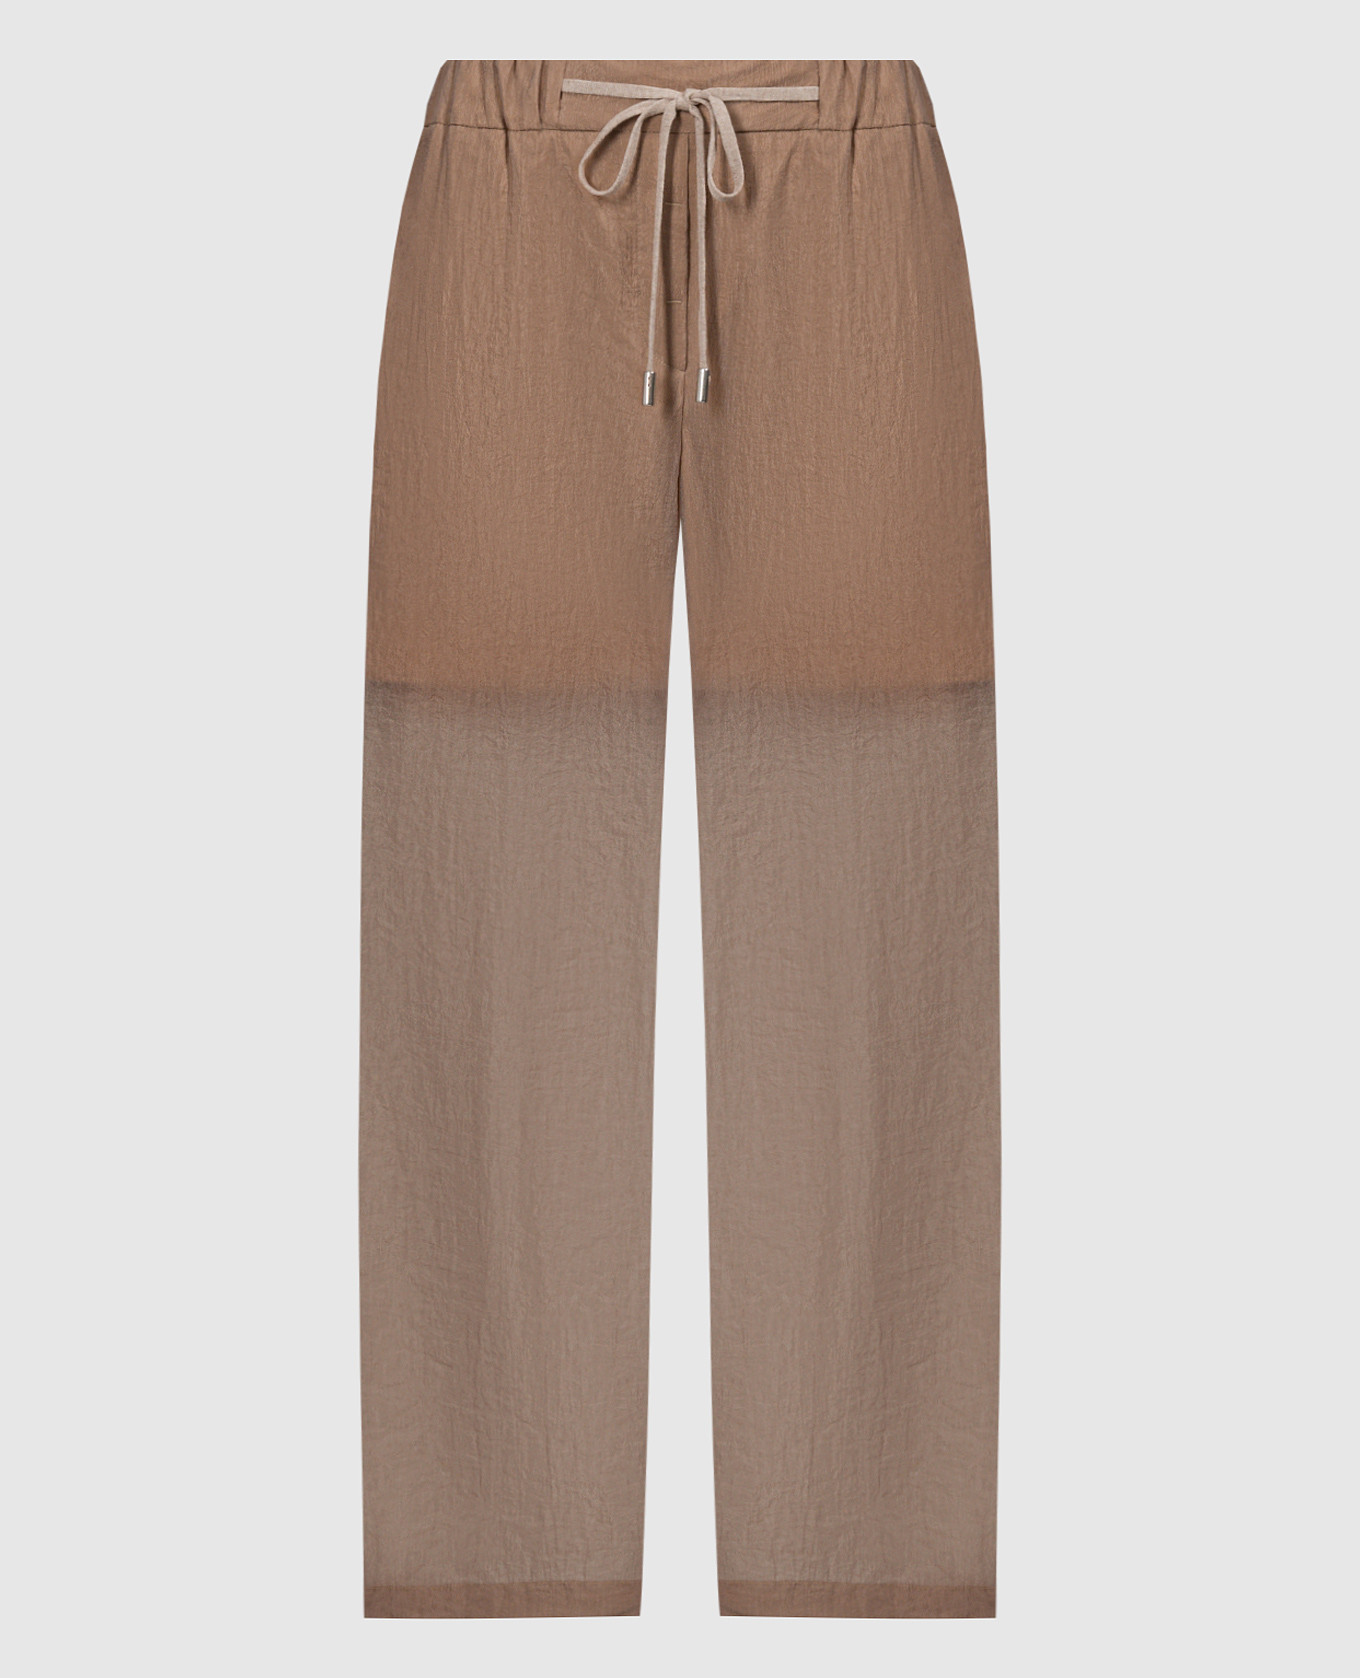 Beige pants with a reaper effect